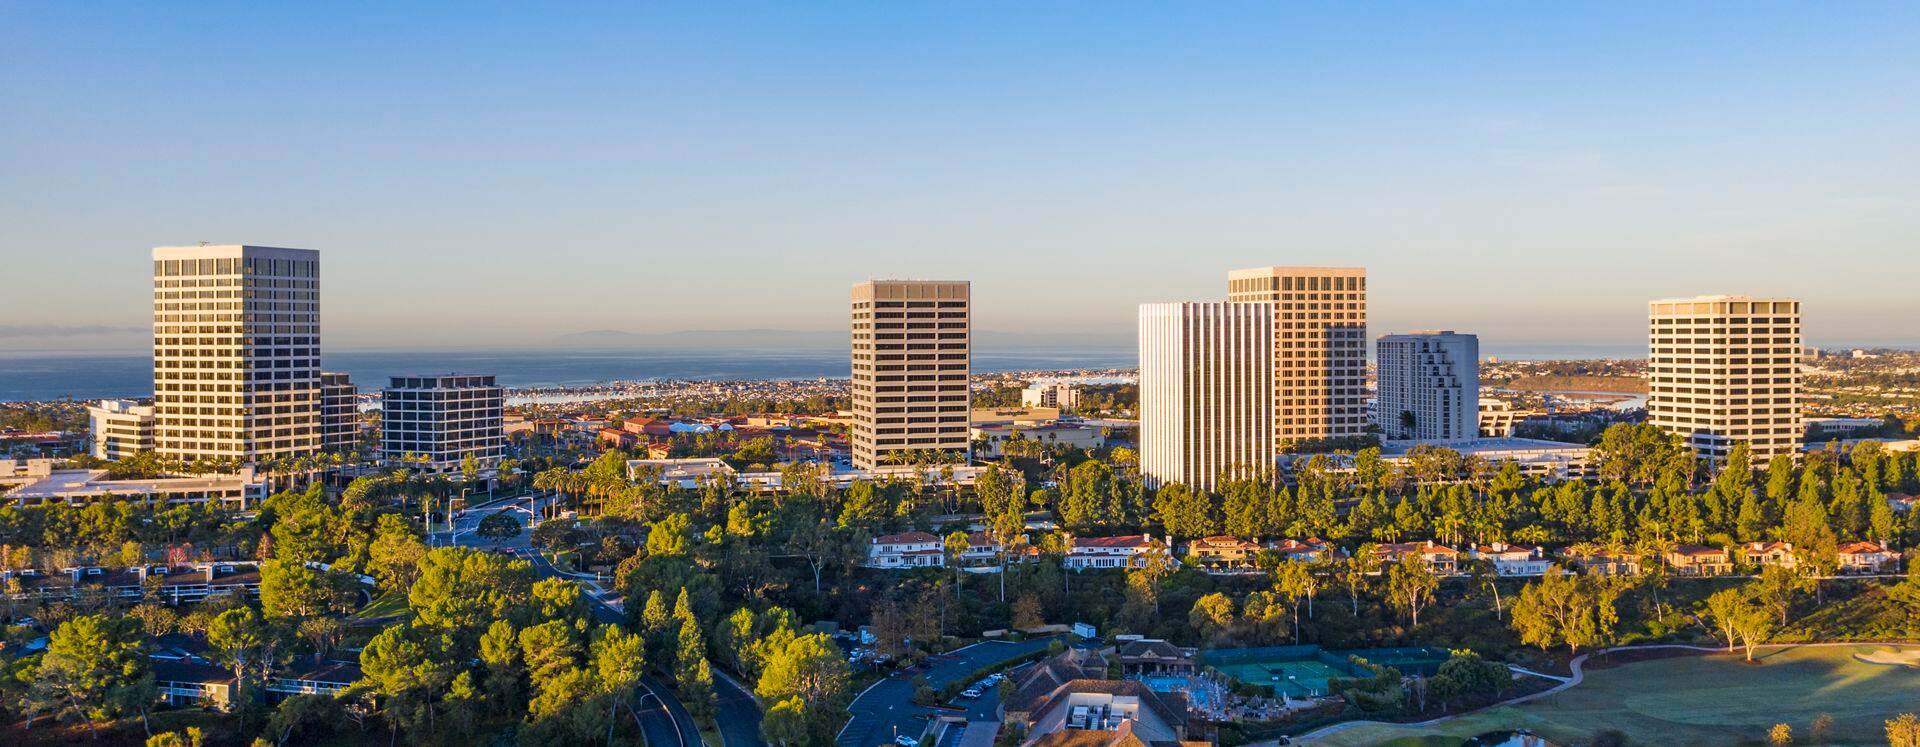 Aerial photography of the Newport Center area featuring snowy mountains in Newport Beach, CA